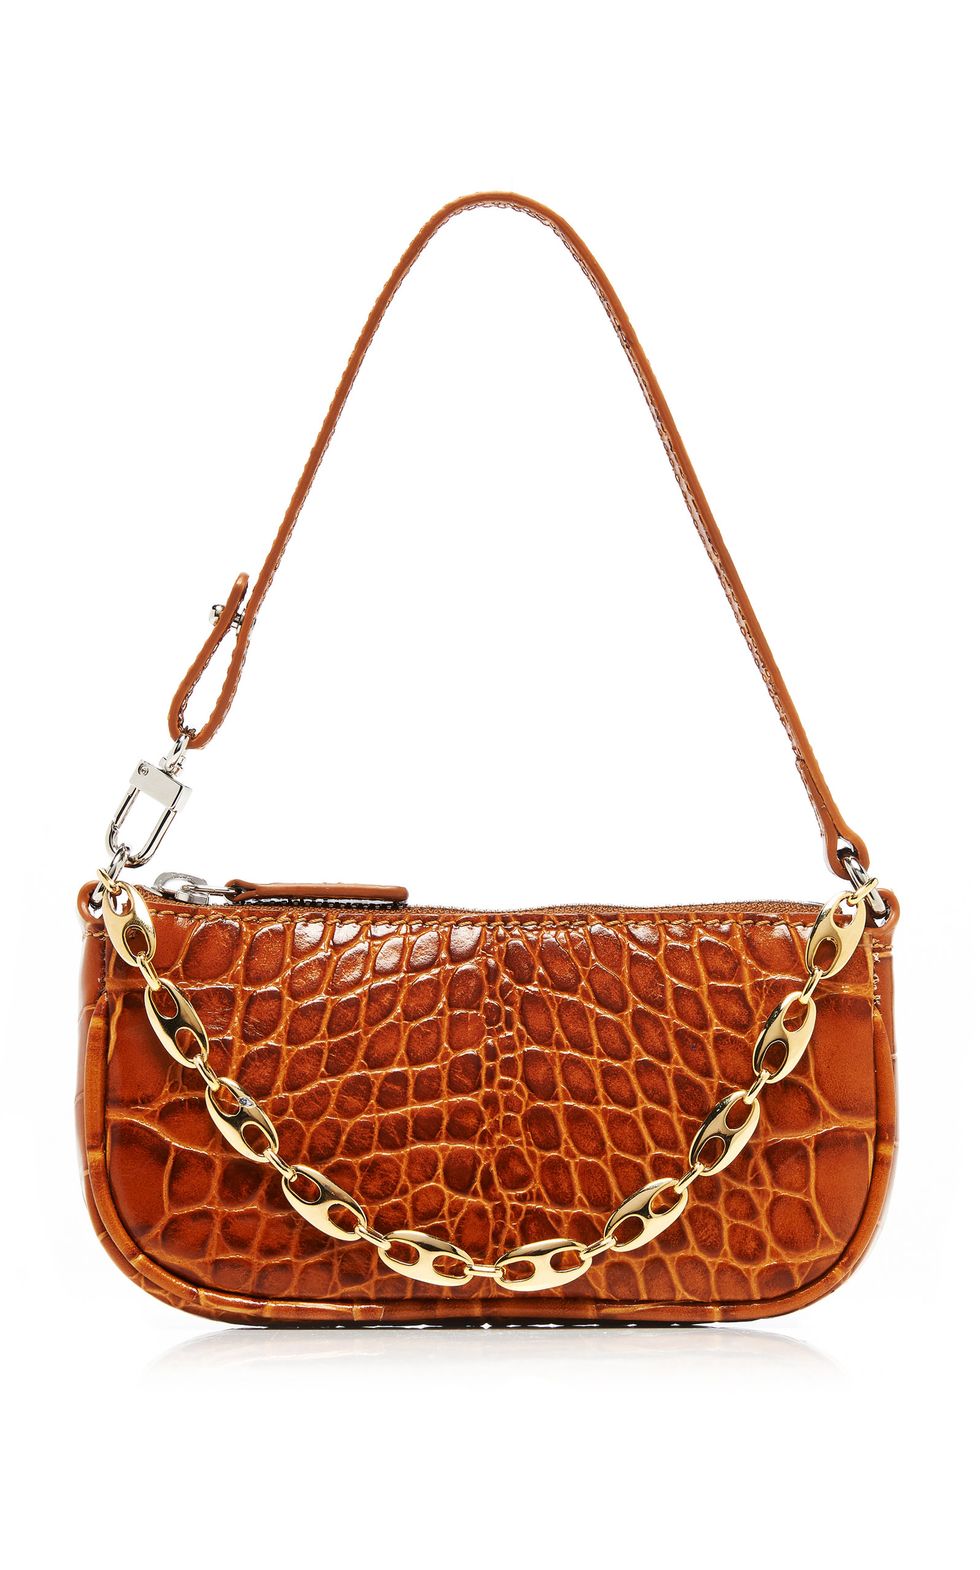 By Far croc effect mini totes embossed leather shoulder bags hand